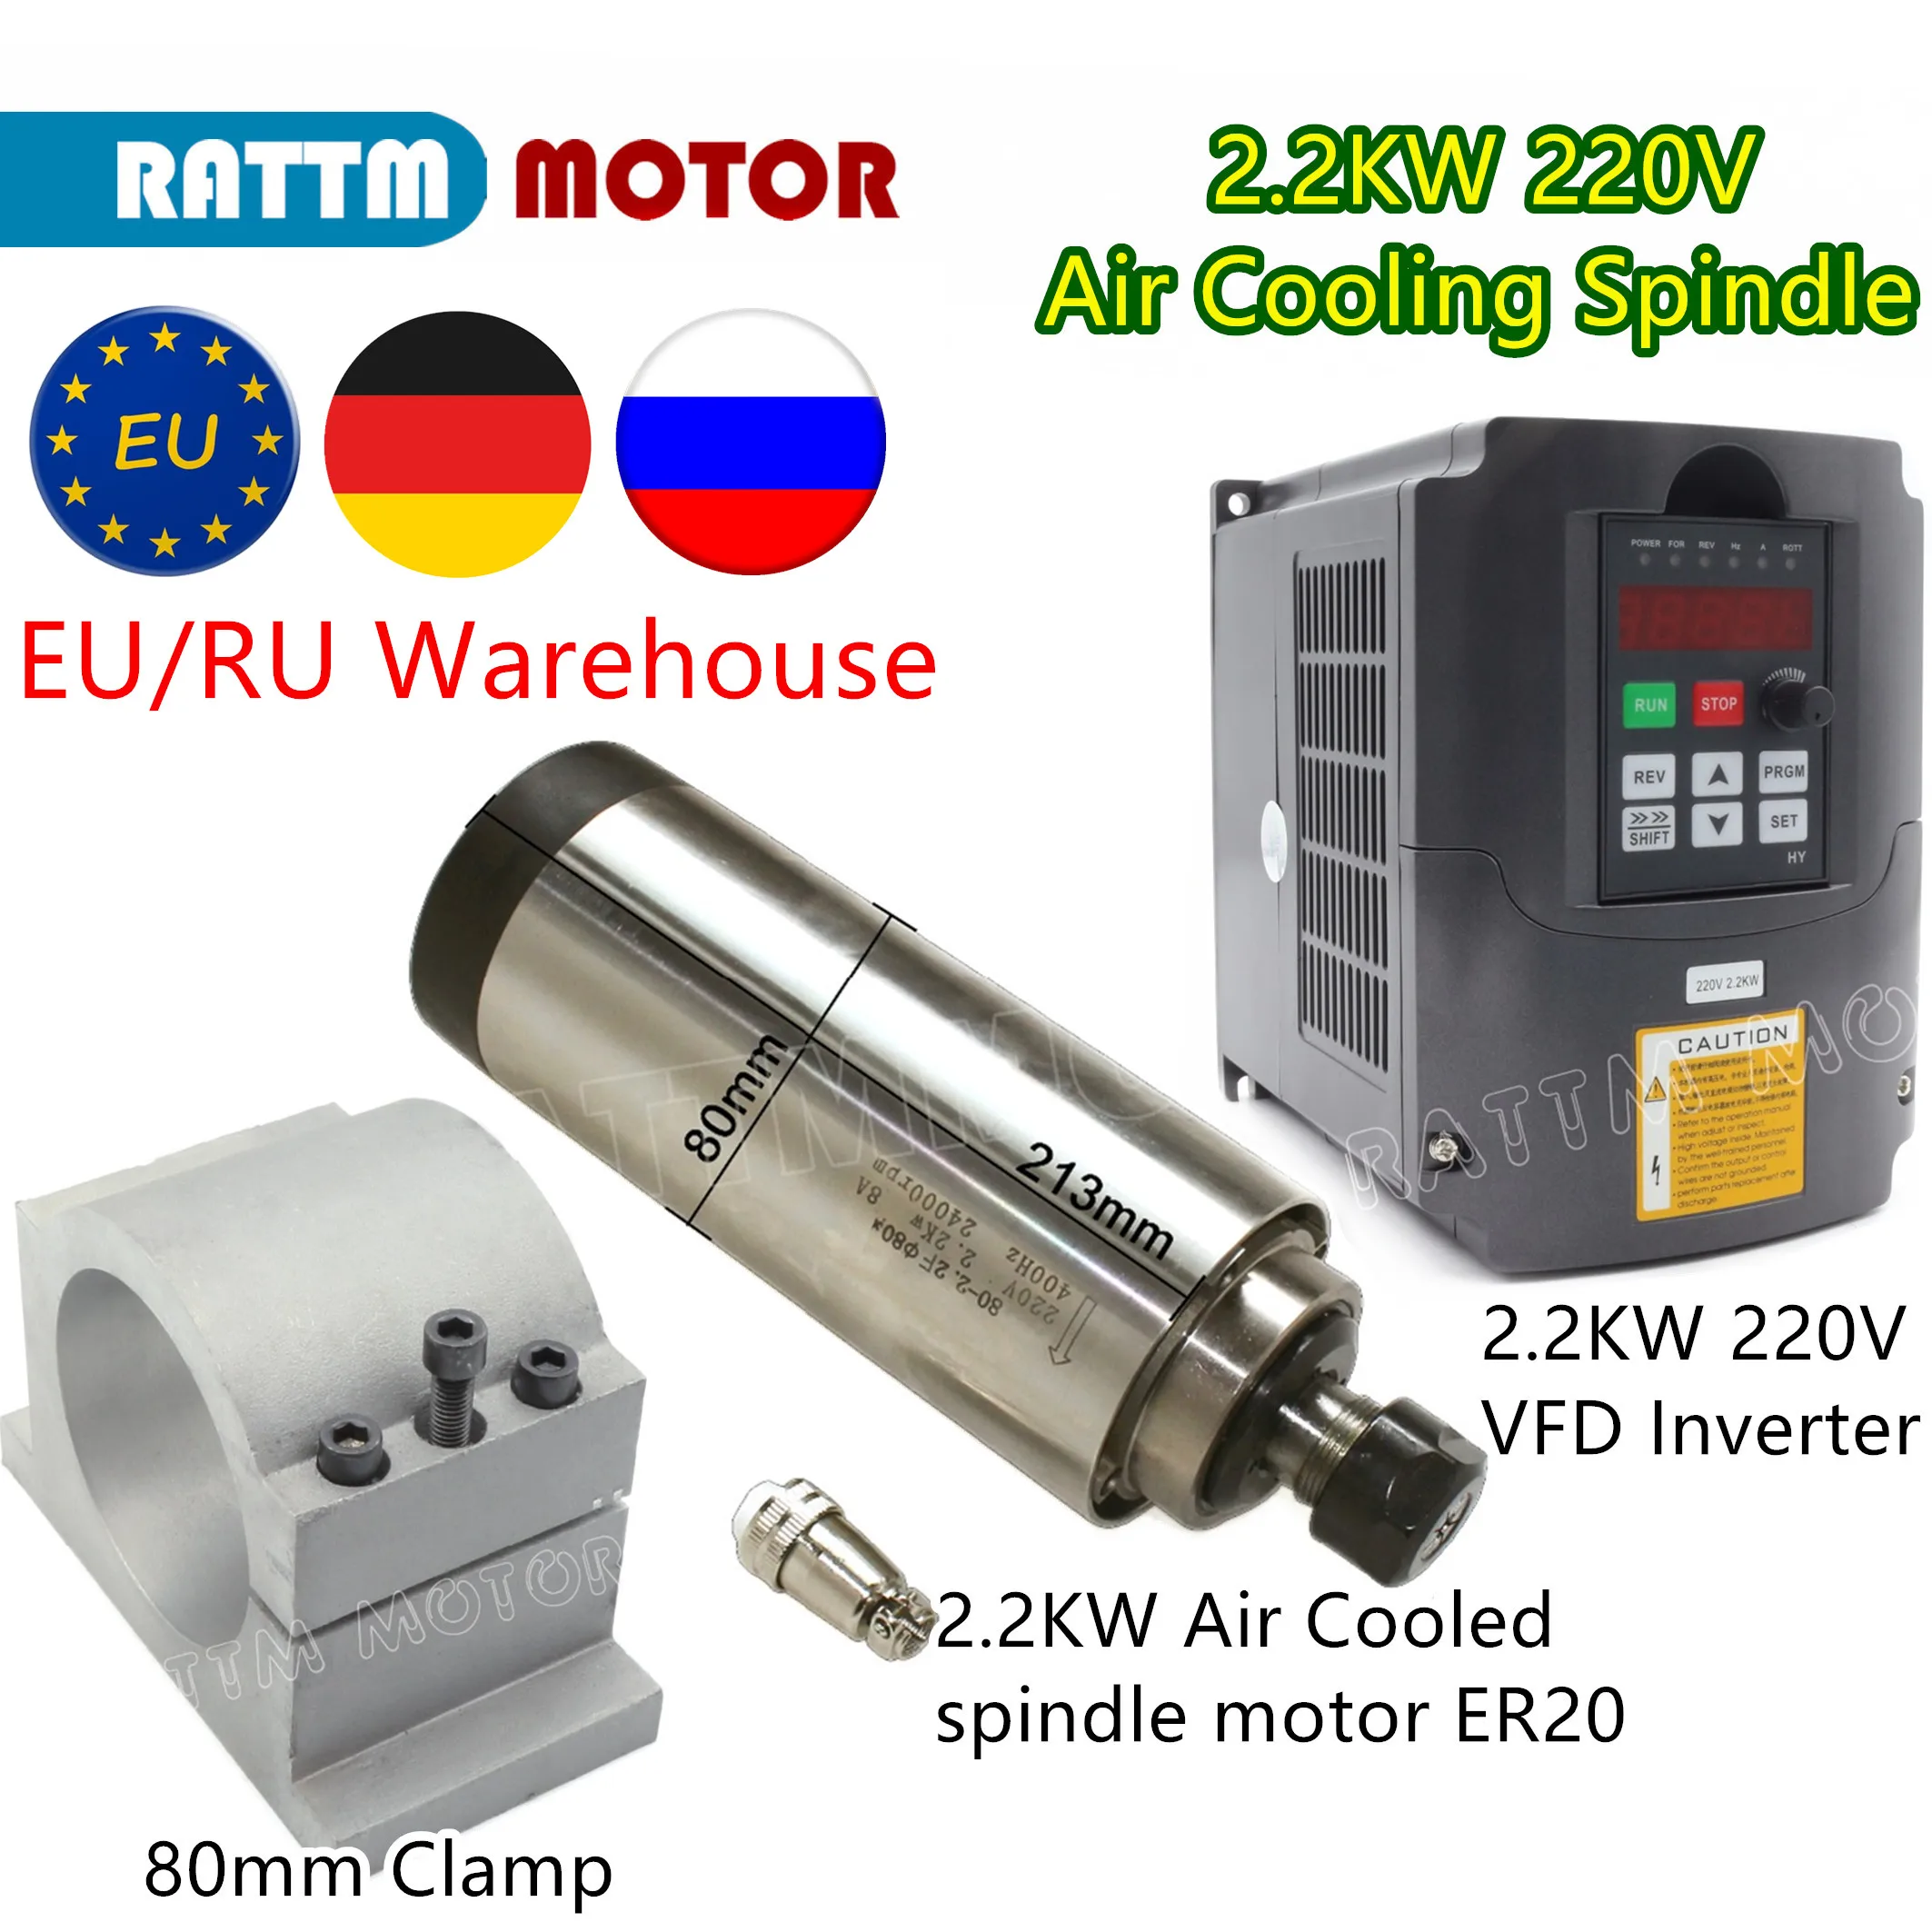 

〖RU/EU Free Ship〗2.2kw 220V Air Cooled Spindle motor 8A ER20 Runout-off 0.01mm & 2.2KW HY VFD Inverter & 80mm Dia Clamp for CNC